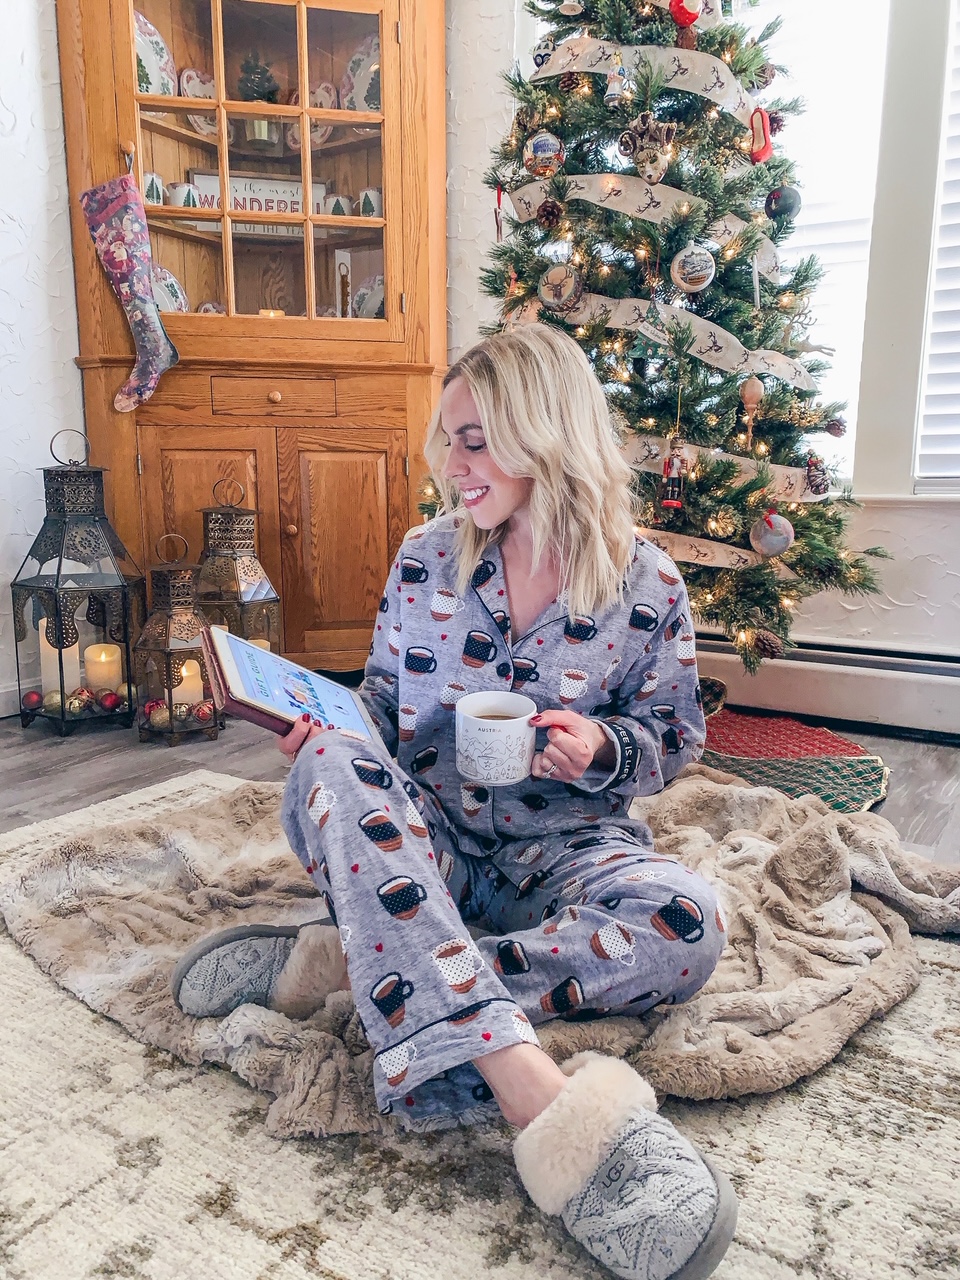 Velvet Pants for the Holidays: Comfy & Chic - Meagan's Moda